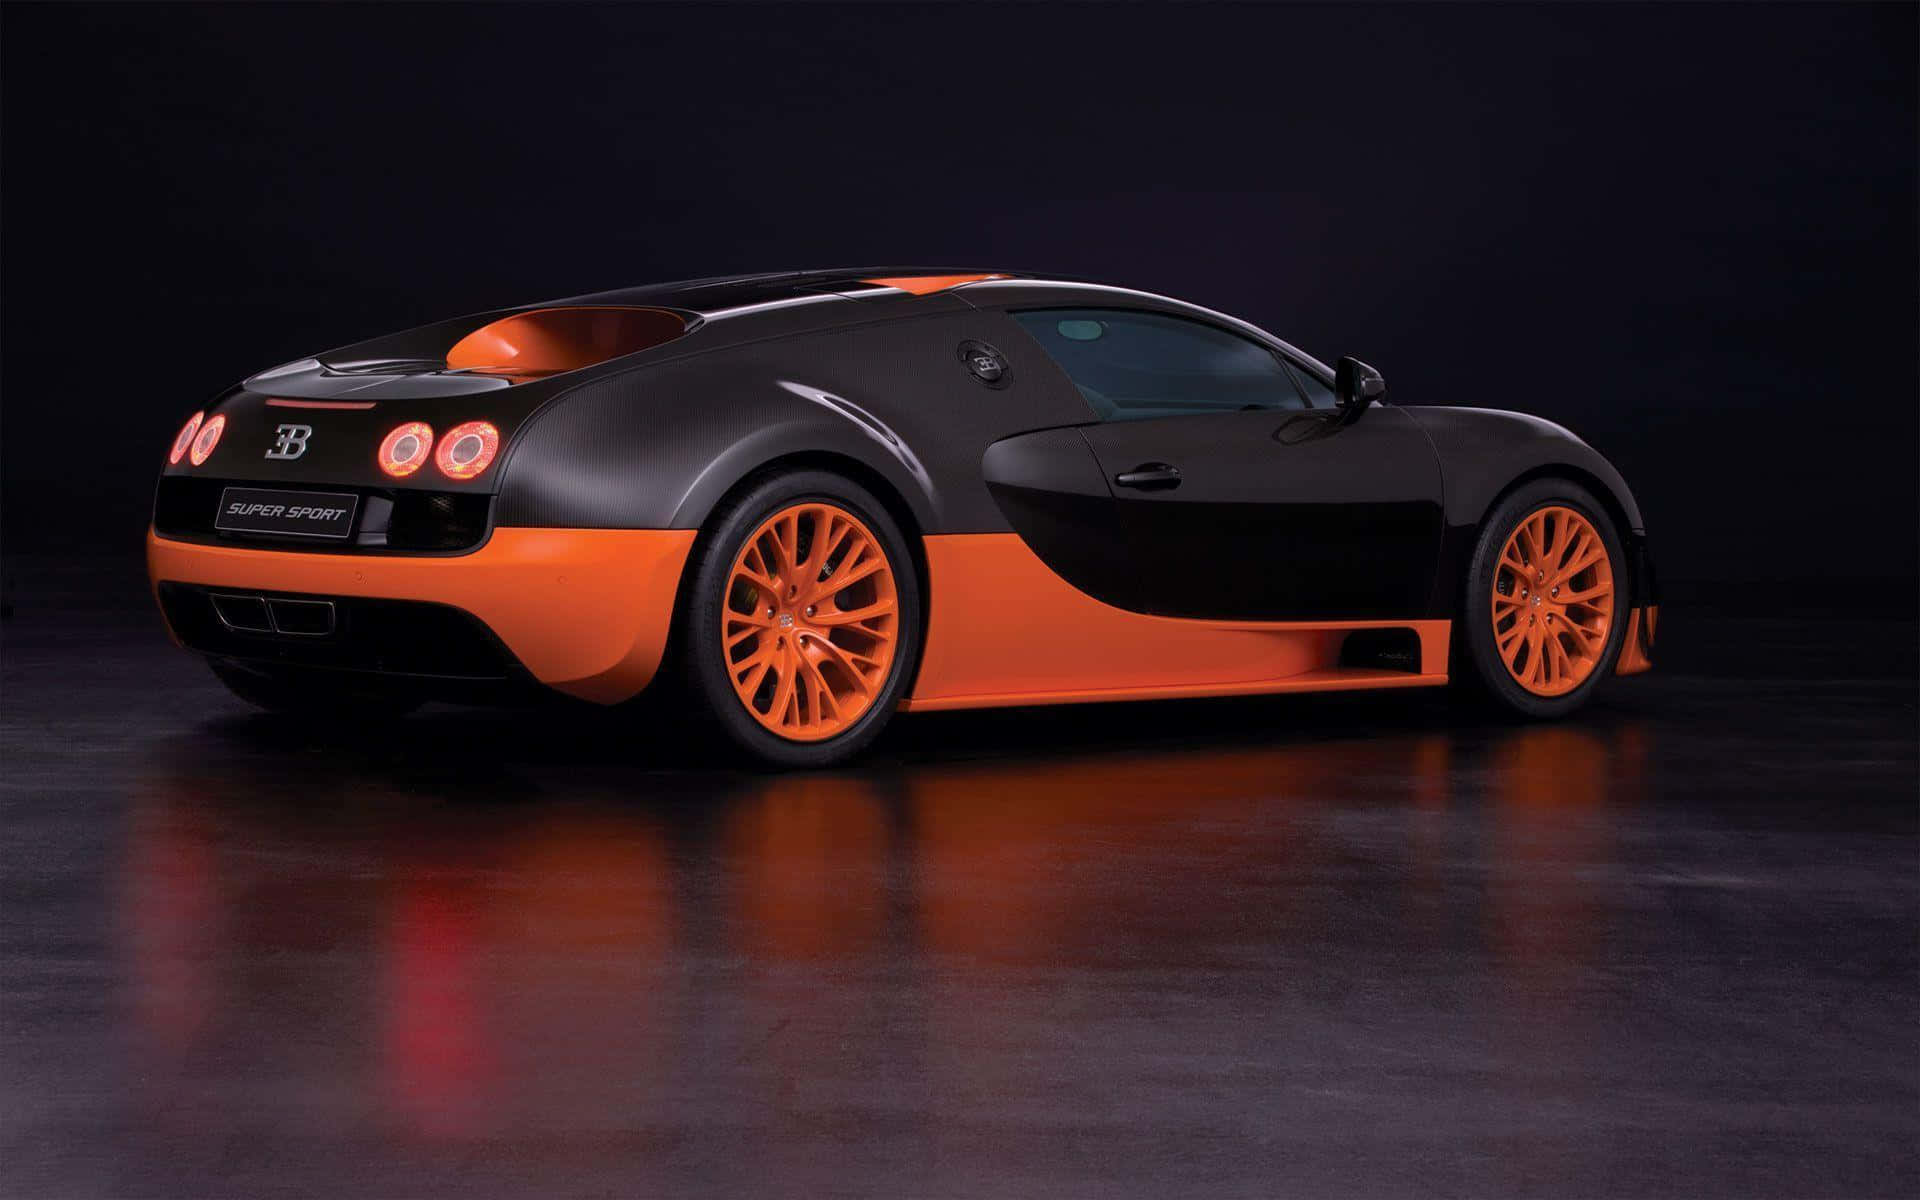 "Experience the speed and power of a Bugatti" Wallpaper